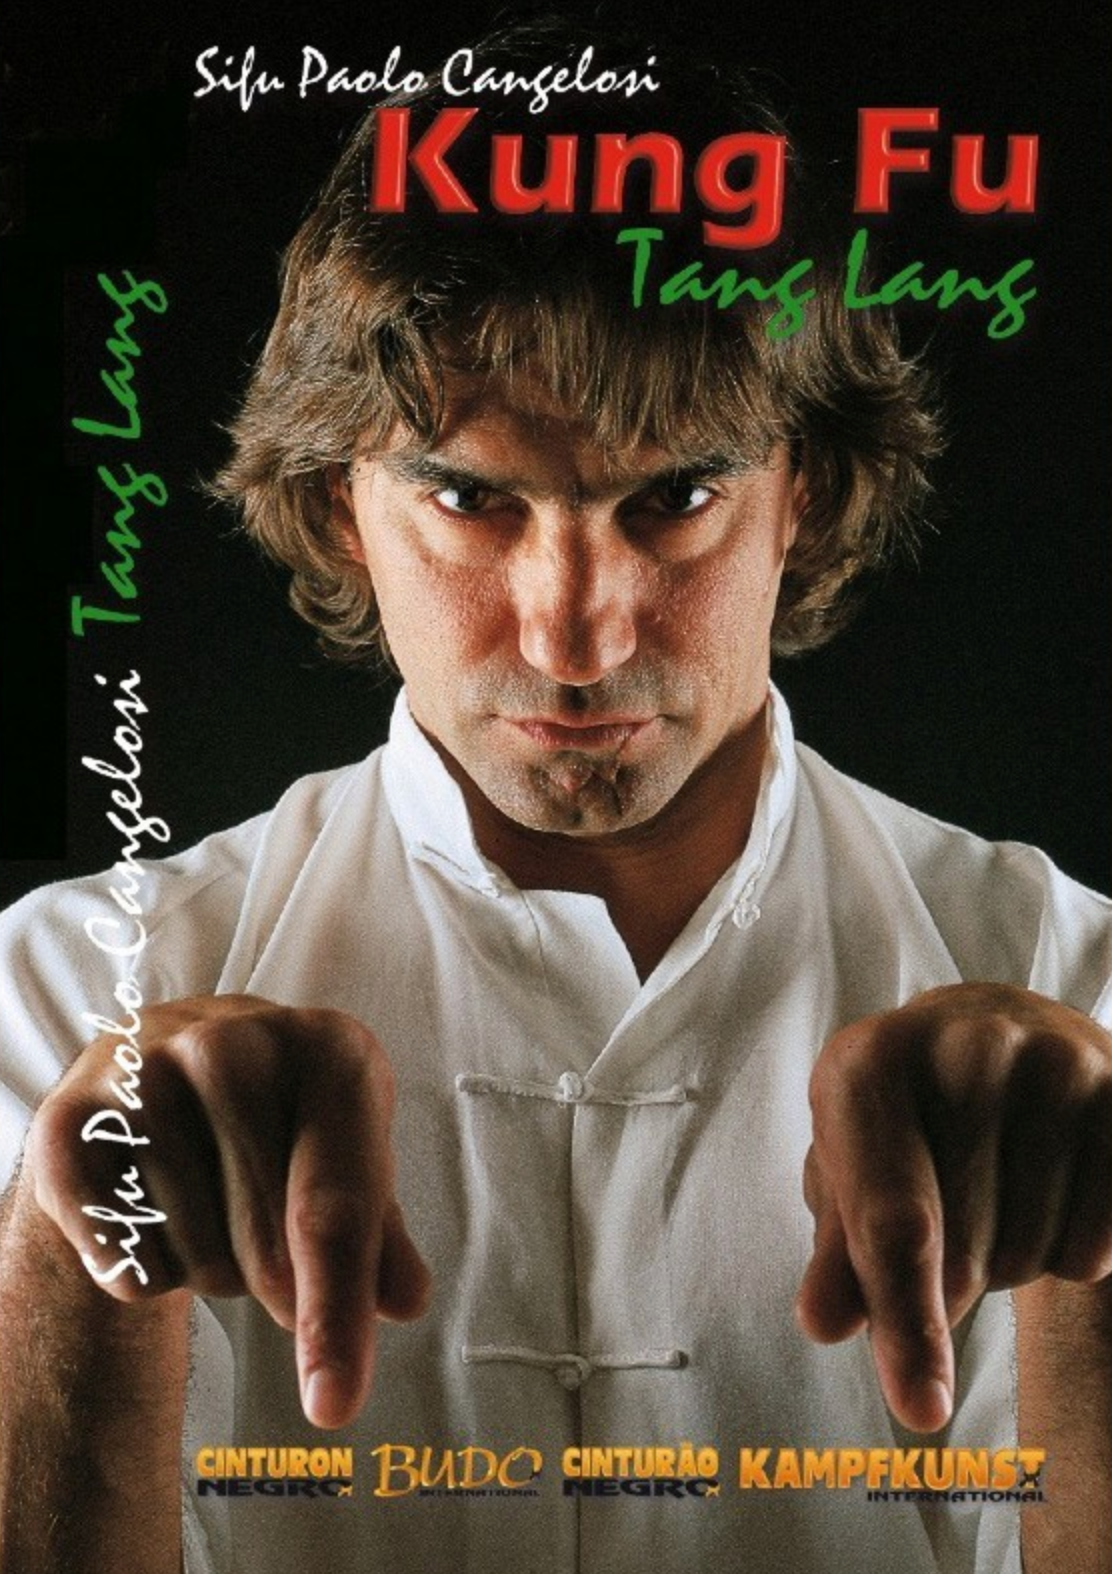 Kung Fu Tang Lang DVD with Paolo Cangelosi - Budovideos Inc